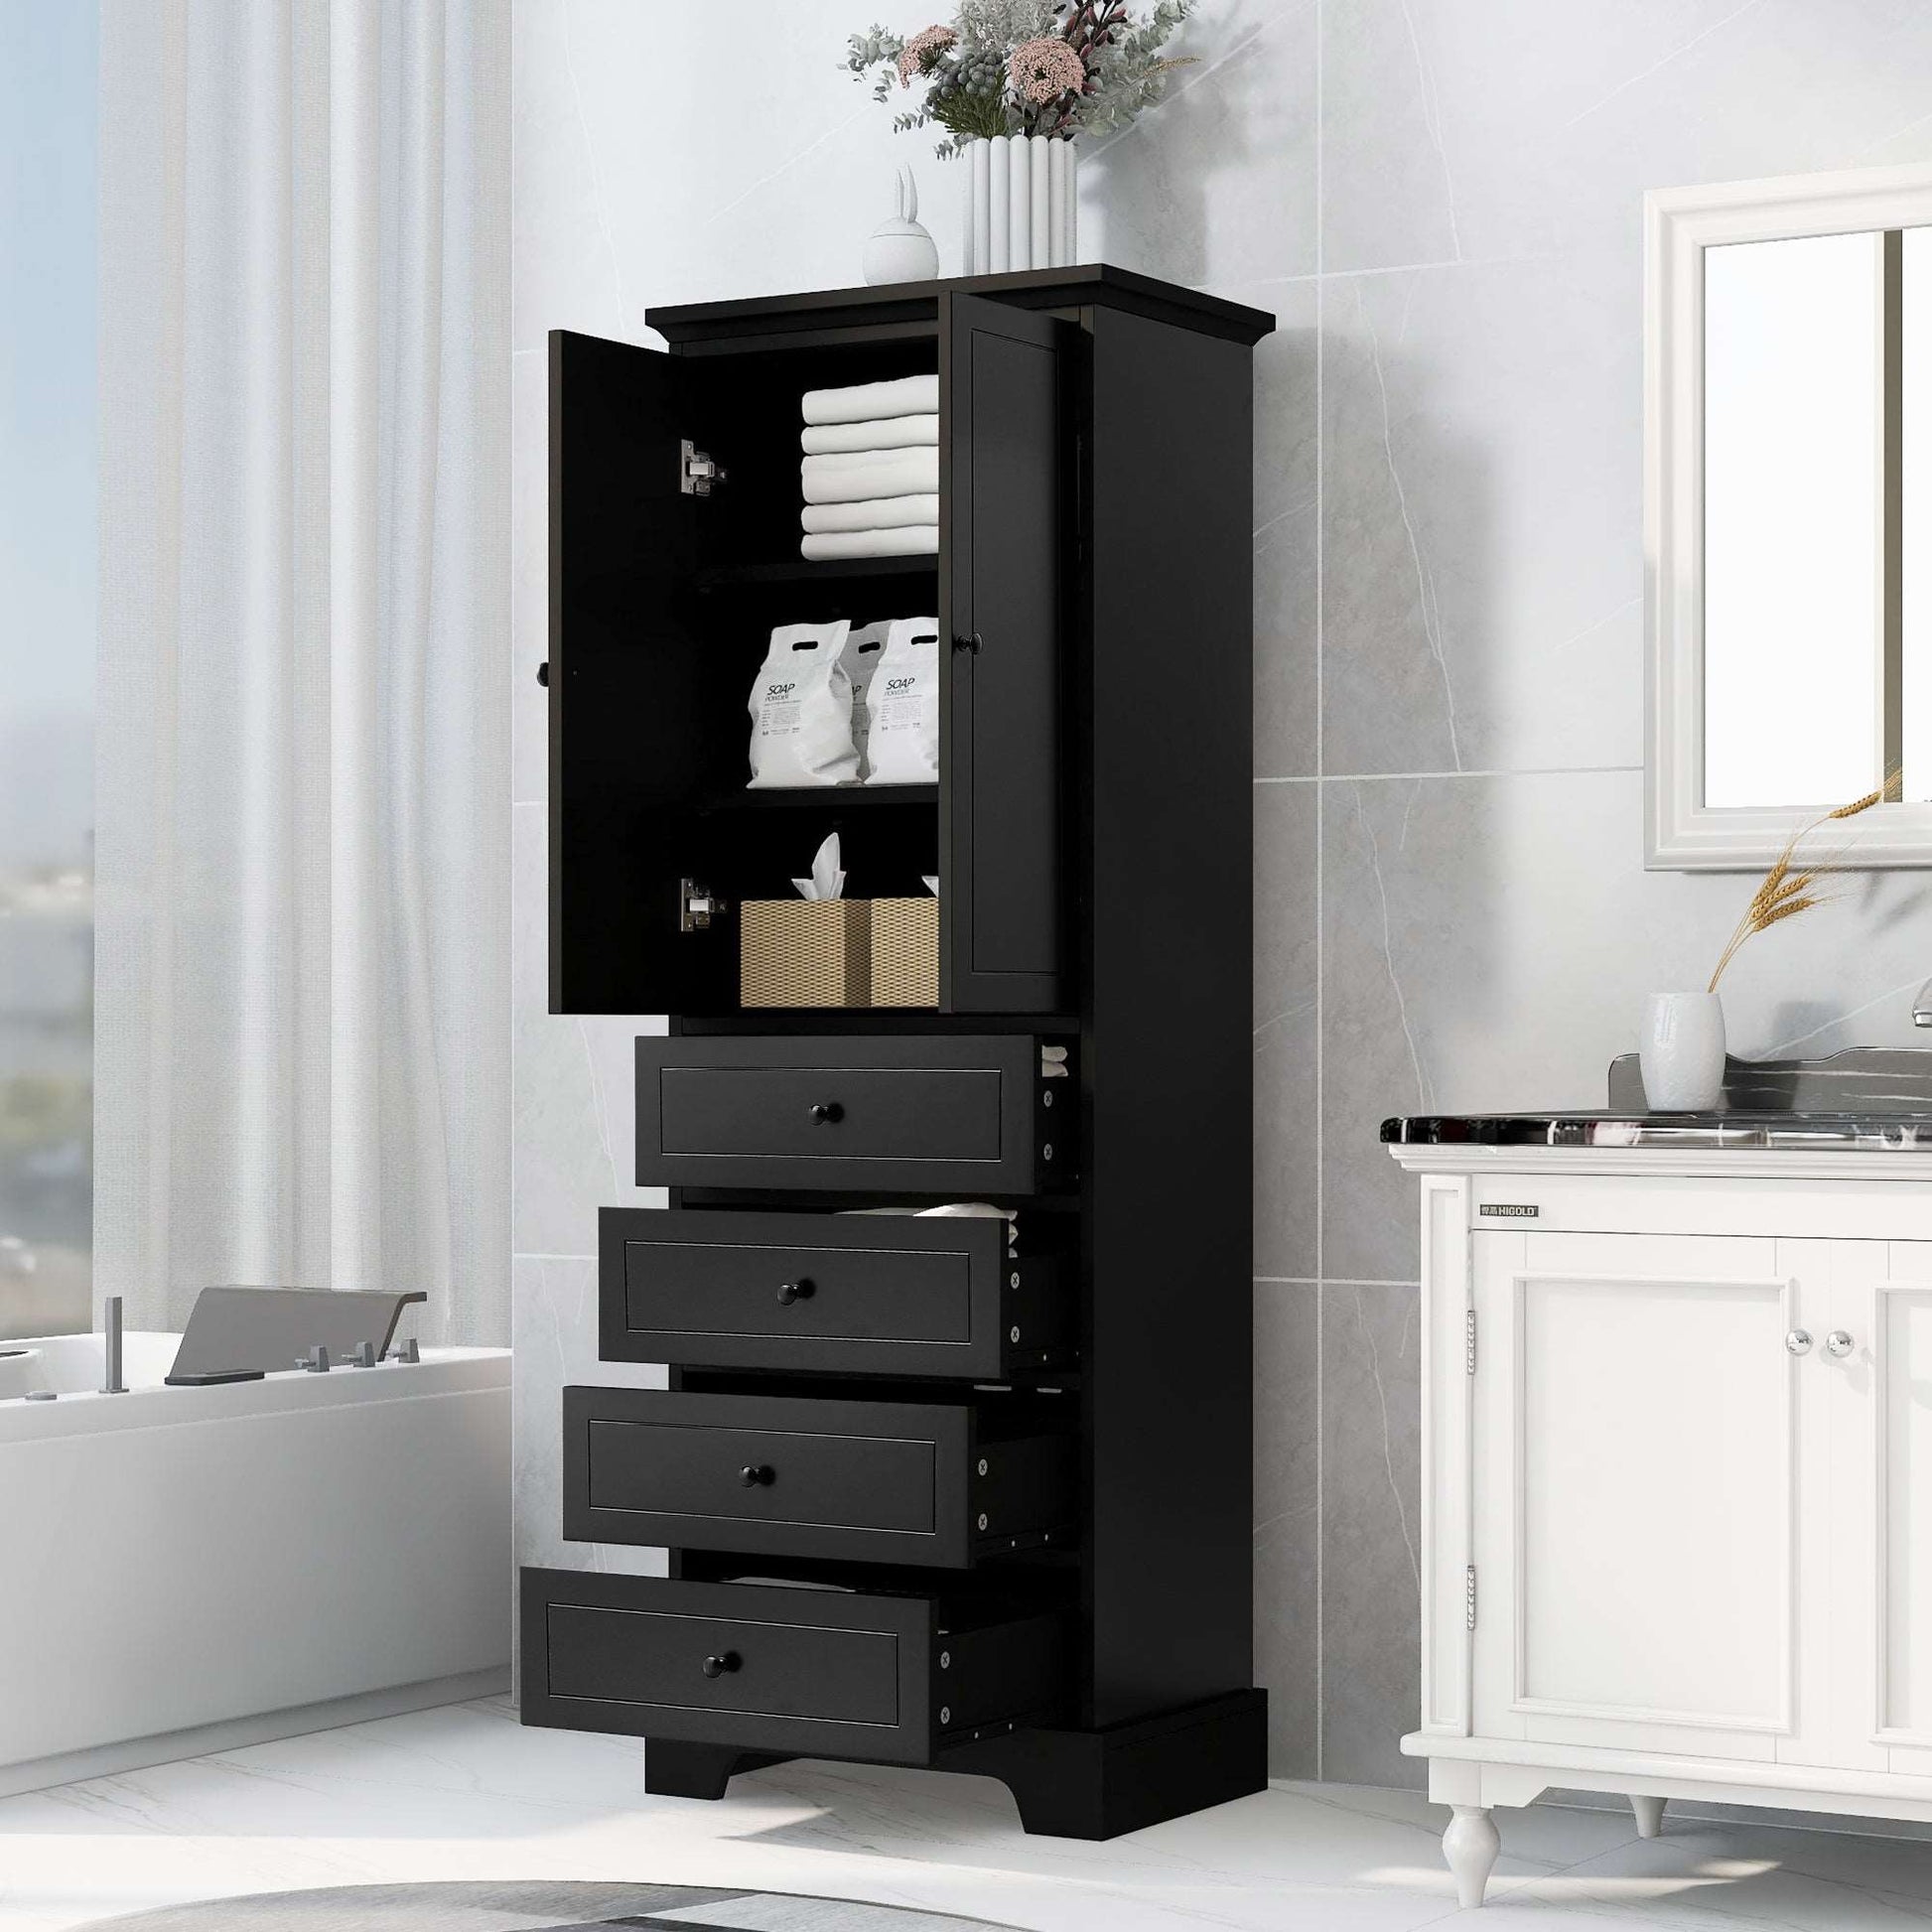 Storage Cabinet with 2 Doors and 4 Drawers for Bathroom Office Adjustable Shelf Grey White Black | ACE DECOR